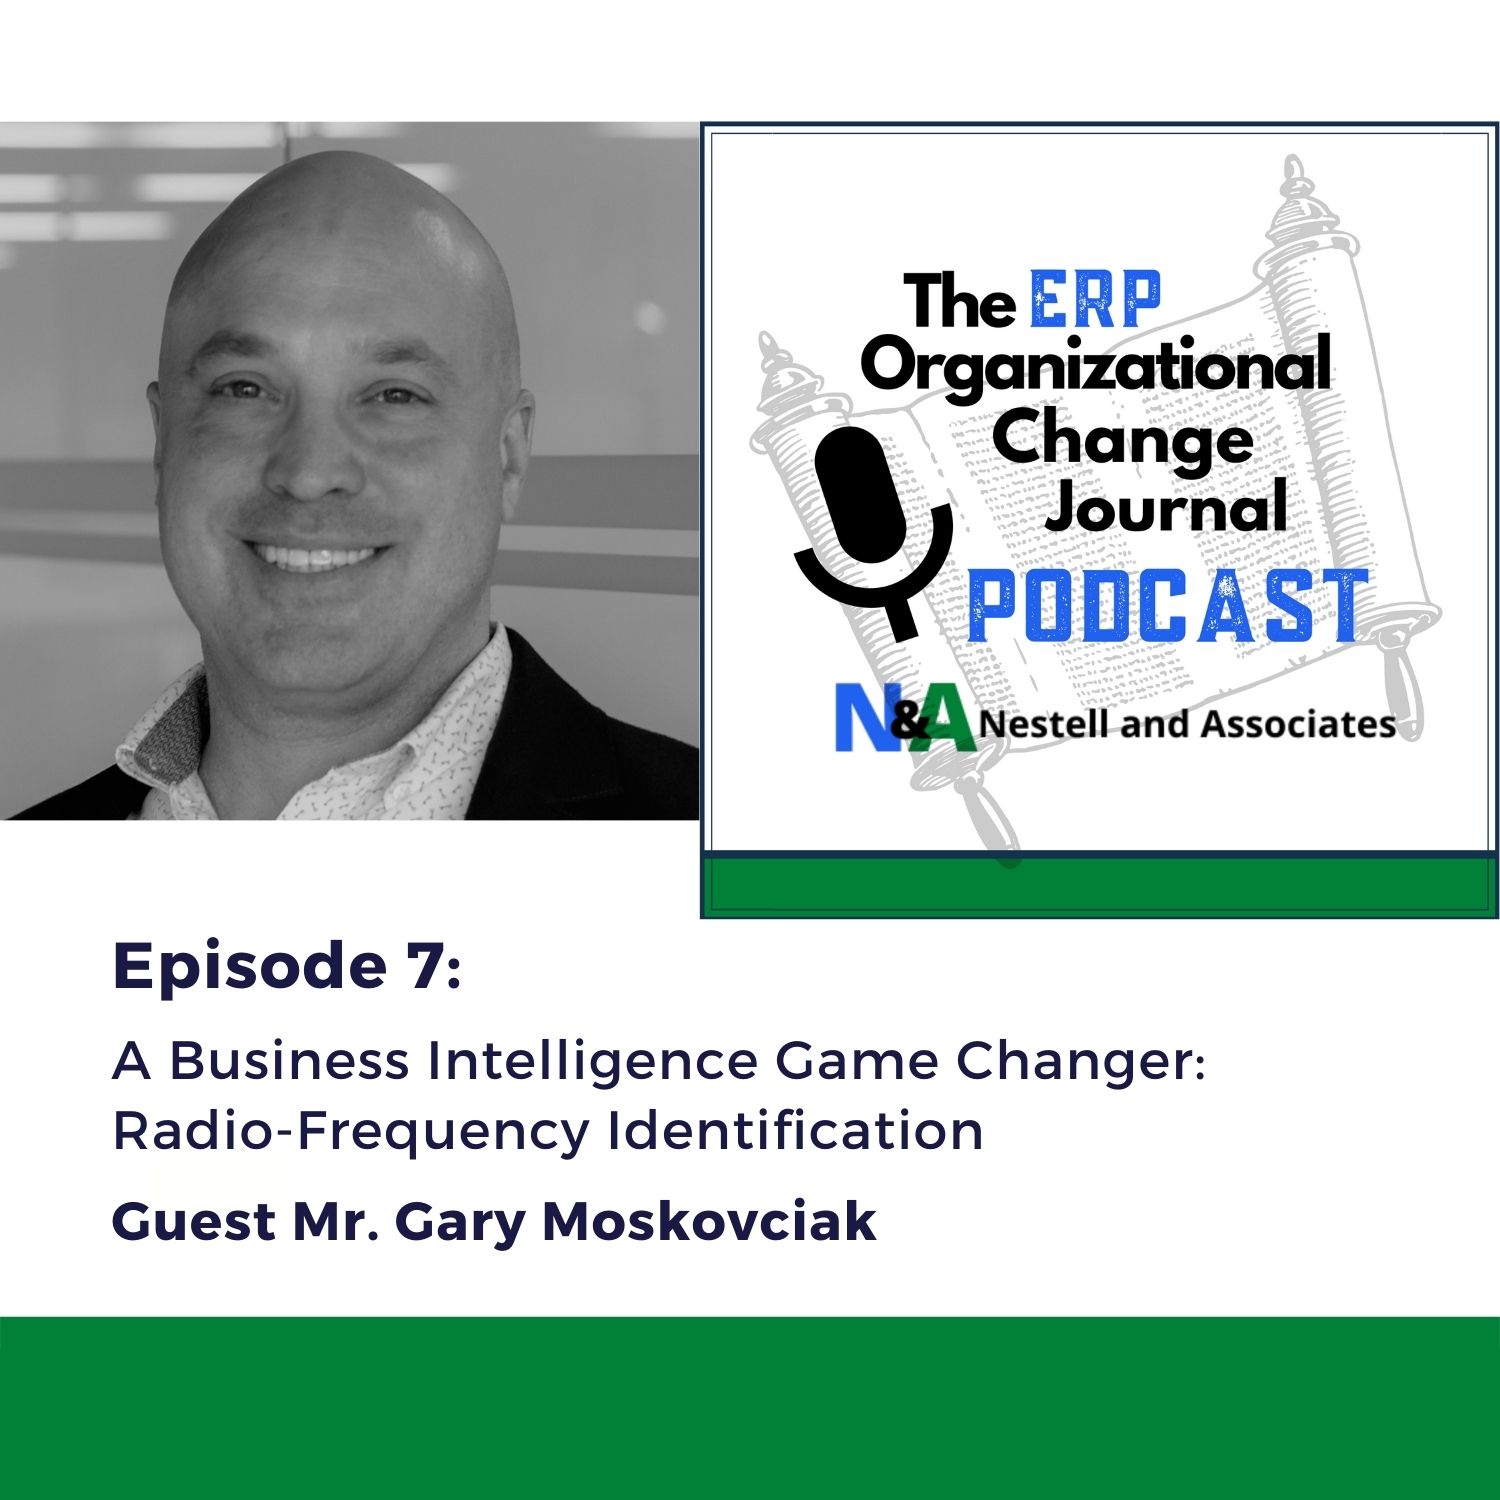 Episode 7 A Business Intelligence Game Changer: Radio-frequency identification Guest Gary Moskovciak